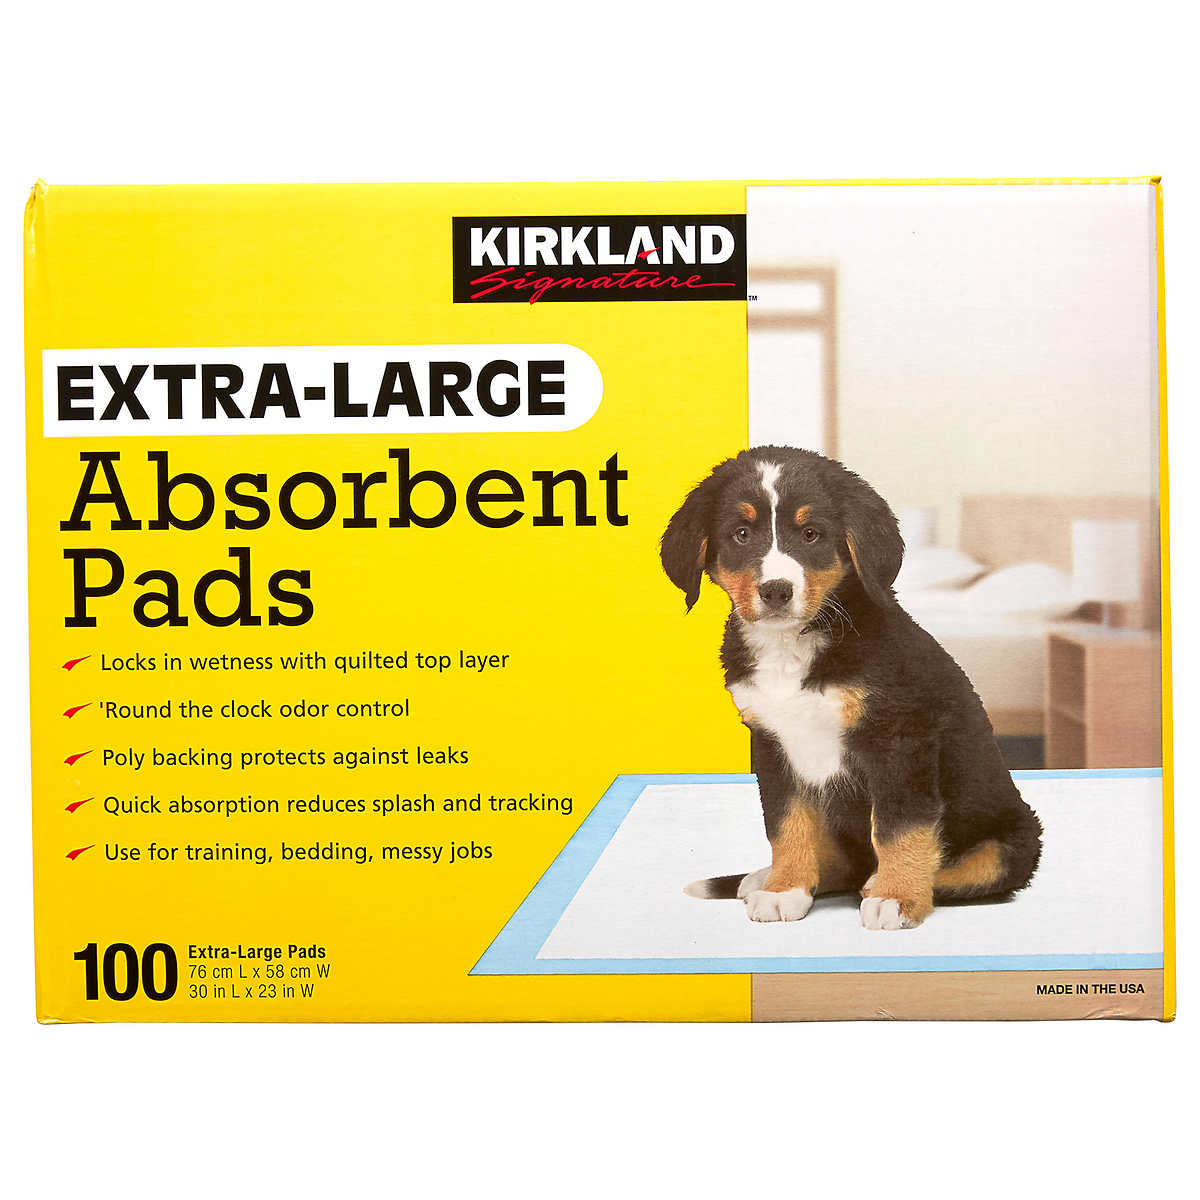 Kirkland Signature Extra-Large Absorbent Pads, 30 in L X 23 in W, 100-count